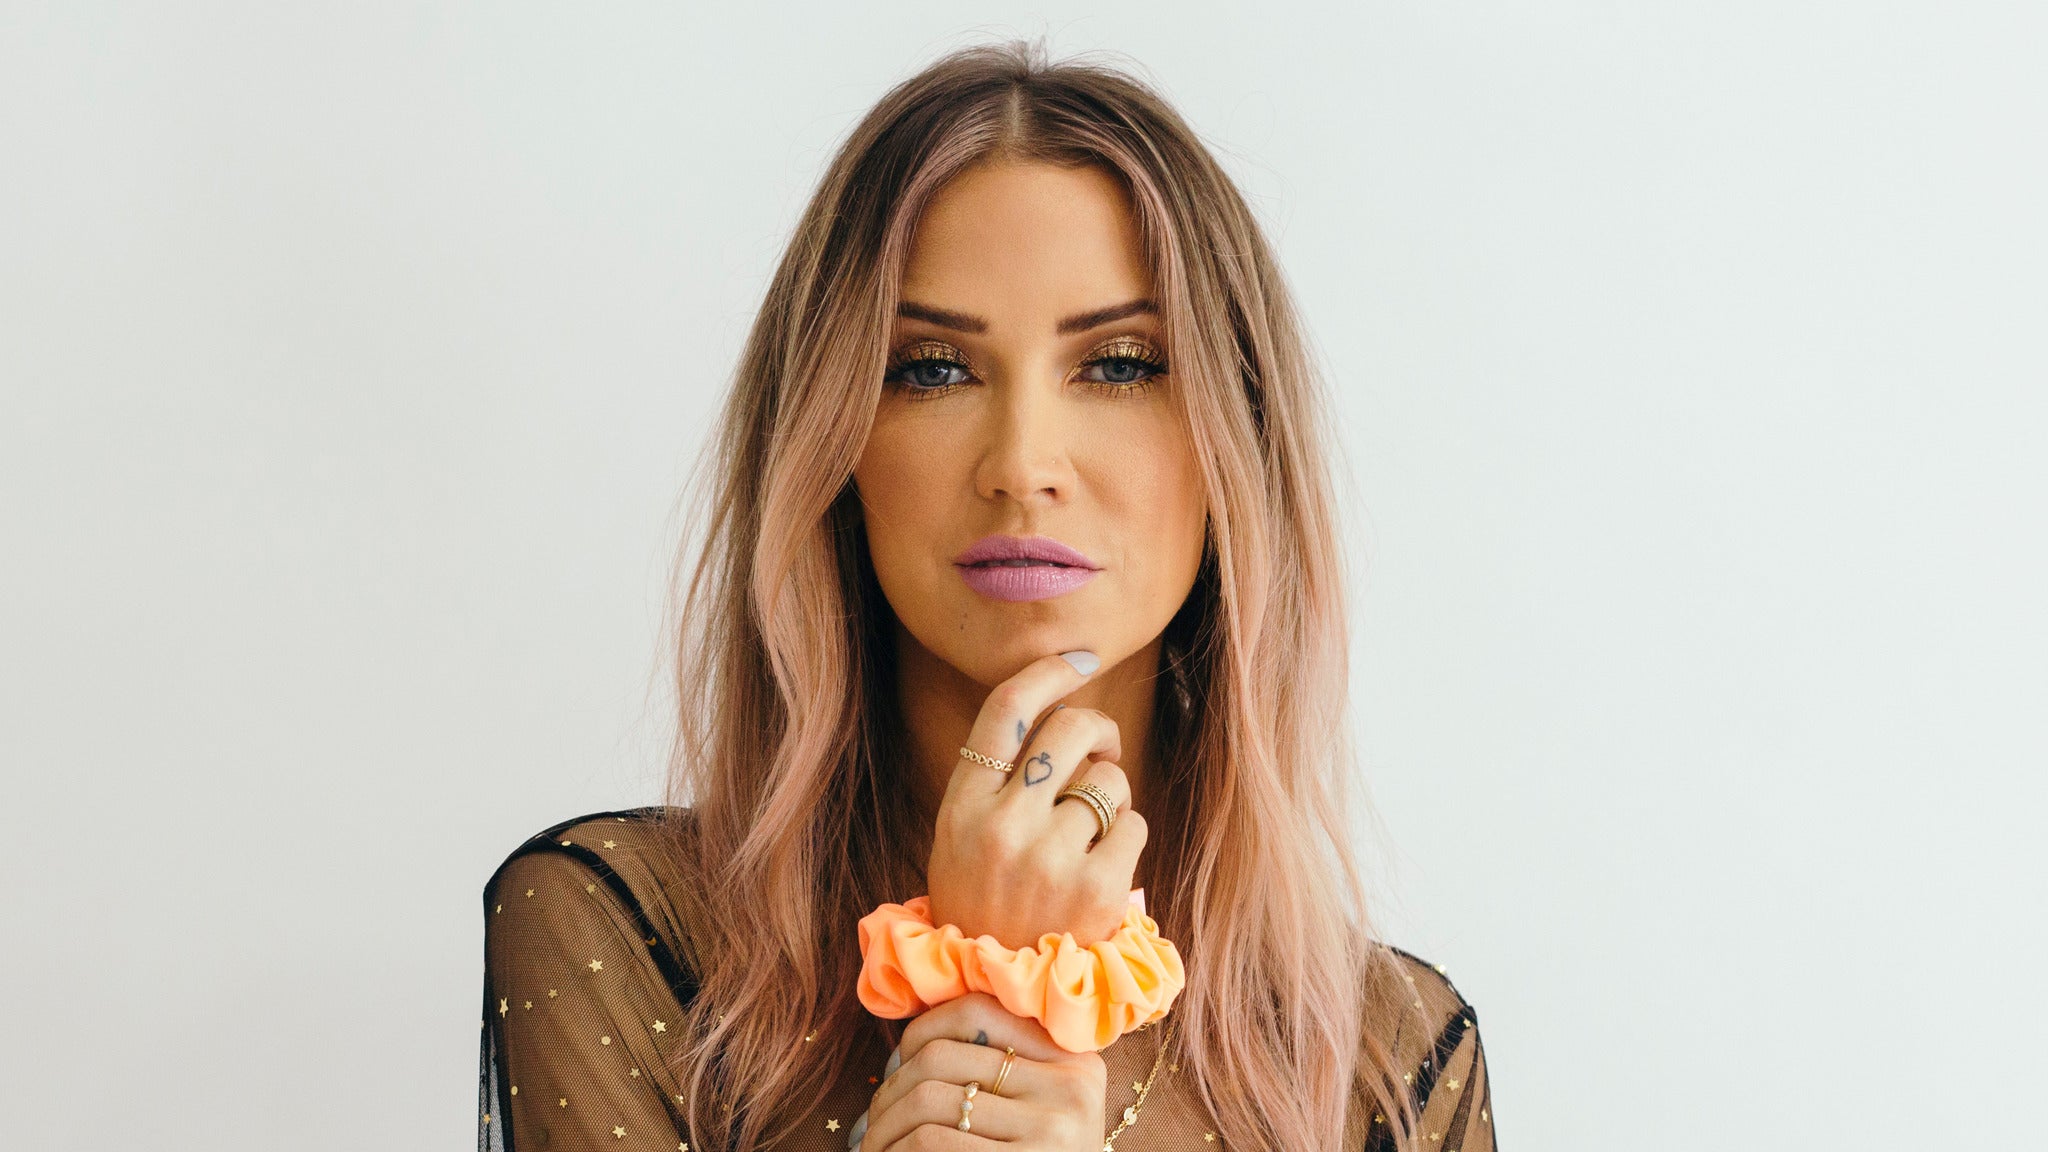 Kaitlyn Bristowe: KB FALL CRAWL in Dallas promo photo for Live Nation Mobile App presale offer code